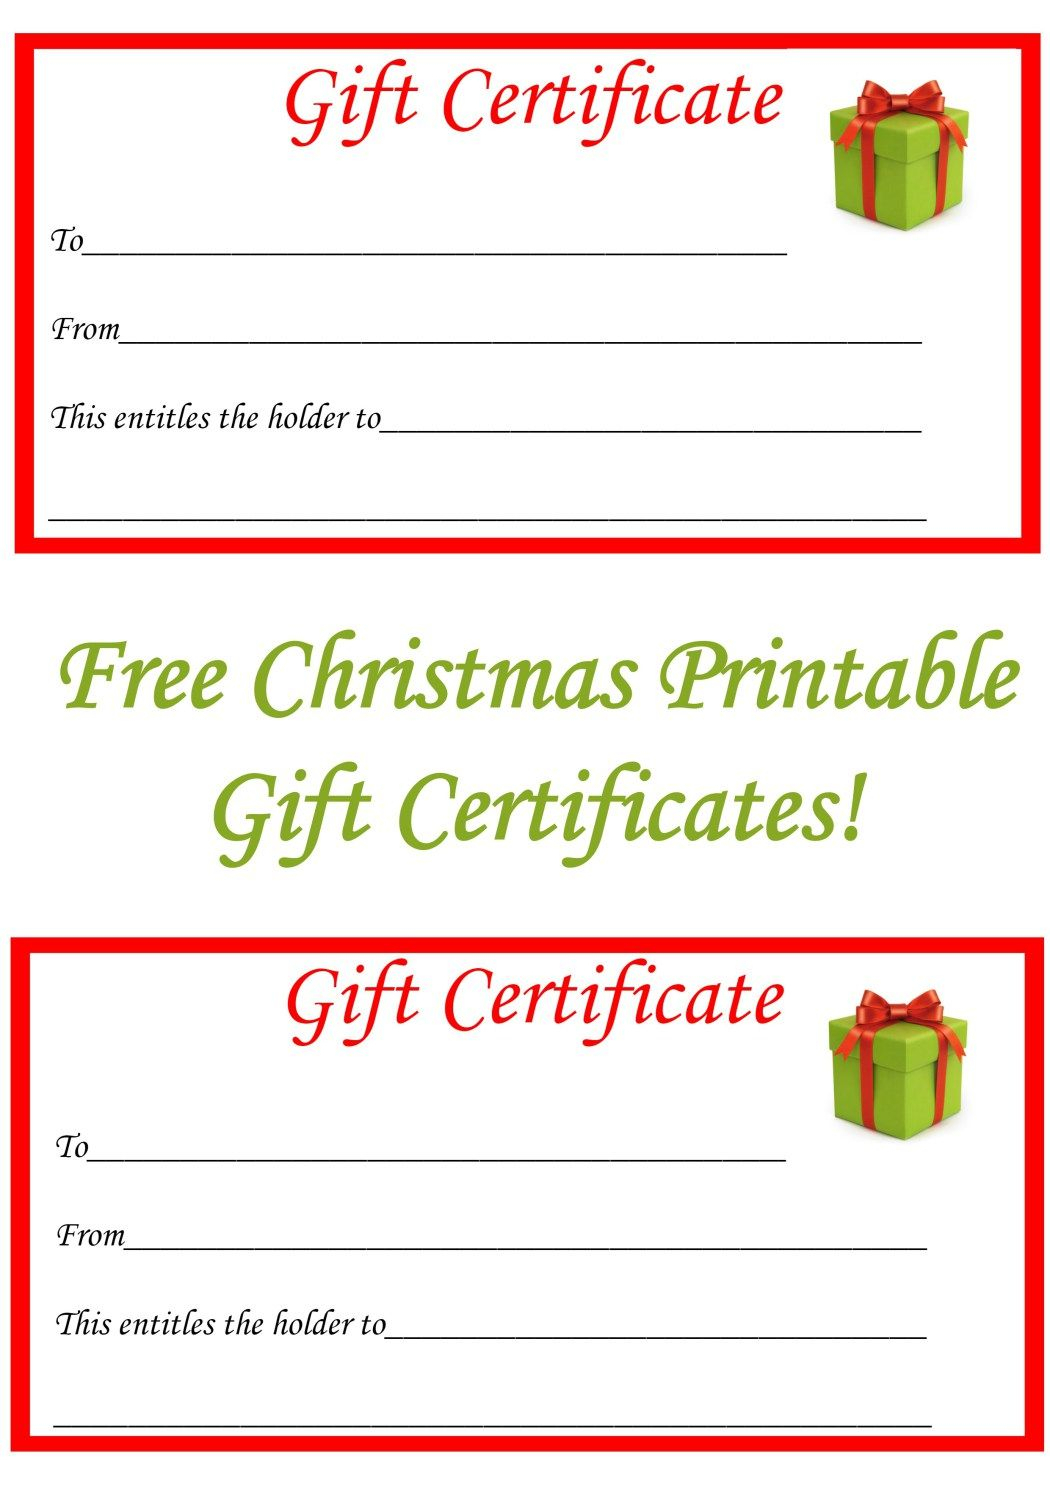 Free Christmas Printable Gift Certificates | Gift Ideas For Homemade Gift Certificate Template